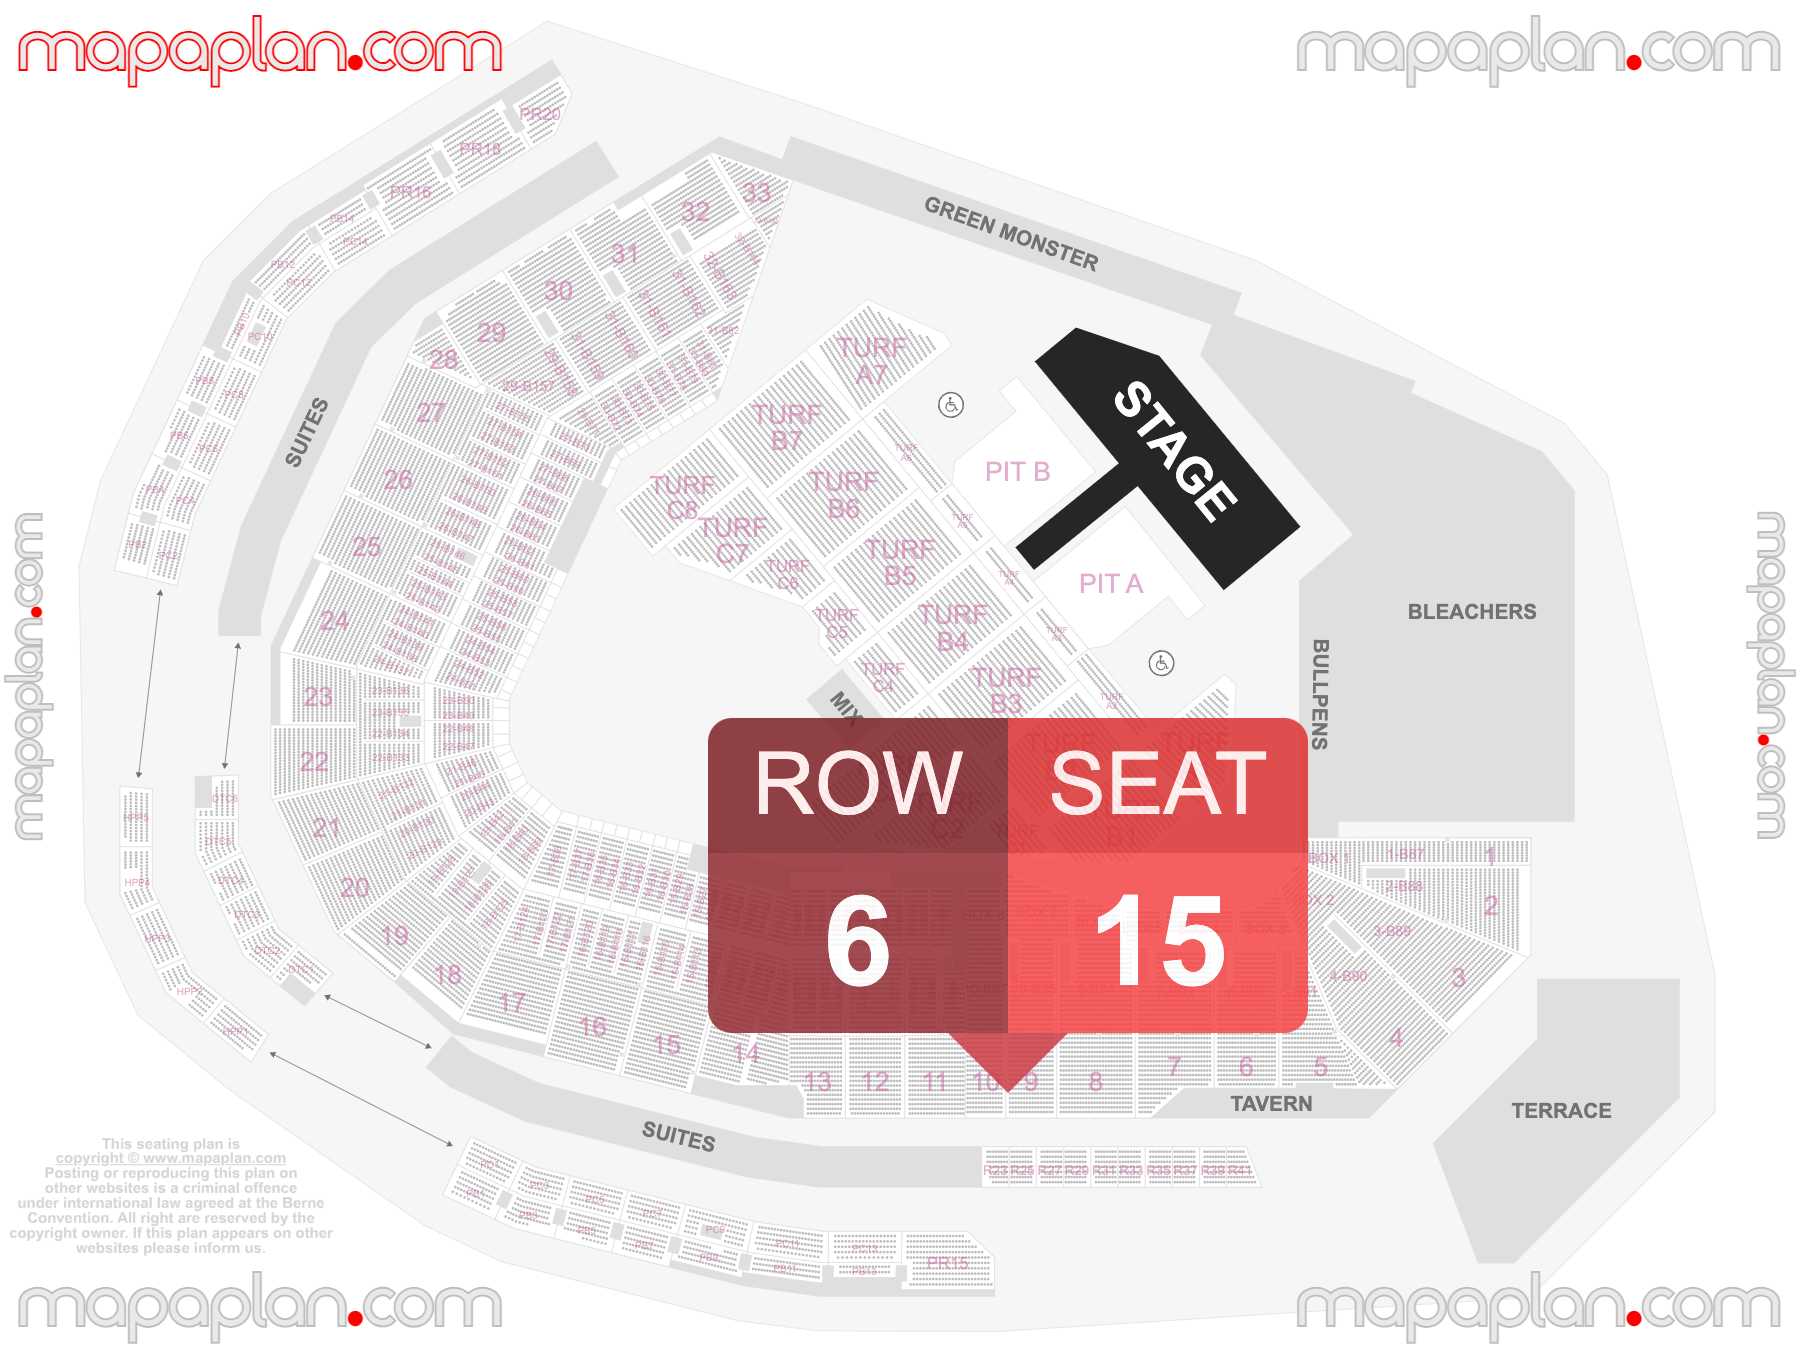 Boston Fenway Park seating chart Concert with extended catwalk runway B-stage and floor PIT general admission standing room only inside capacity view arrangement plan - Interactive virtual 3d best seats & rows detailed stadium image configuration layout